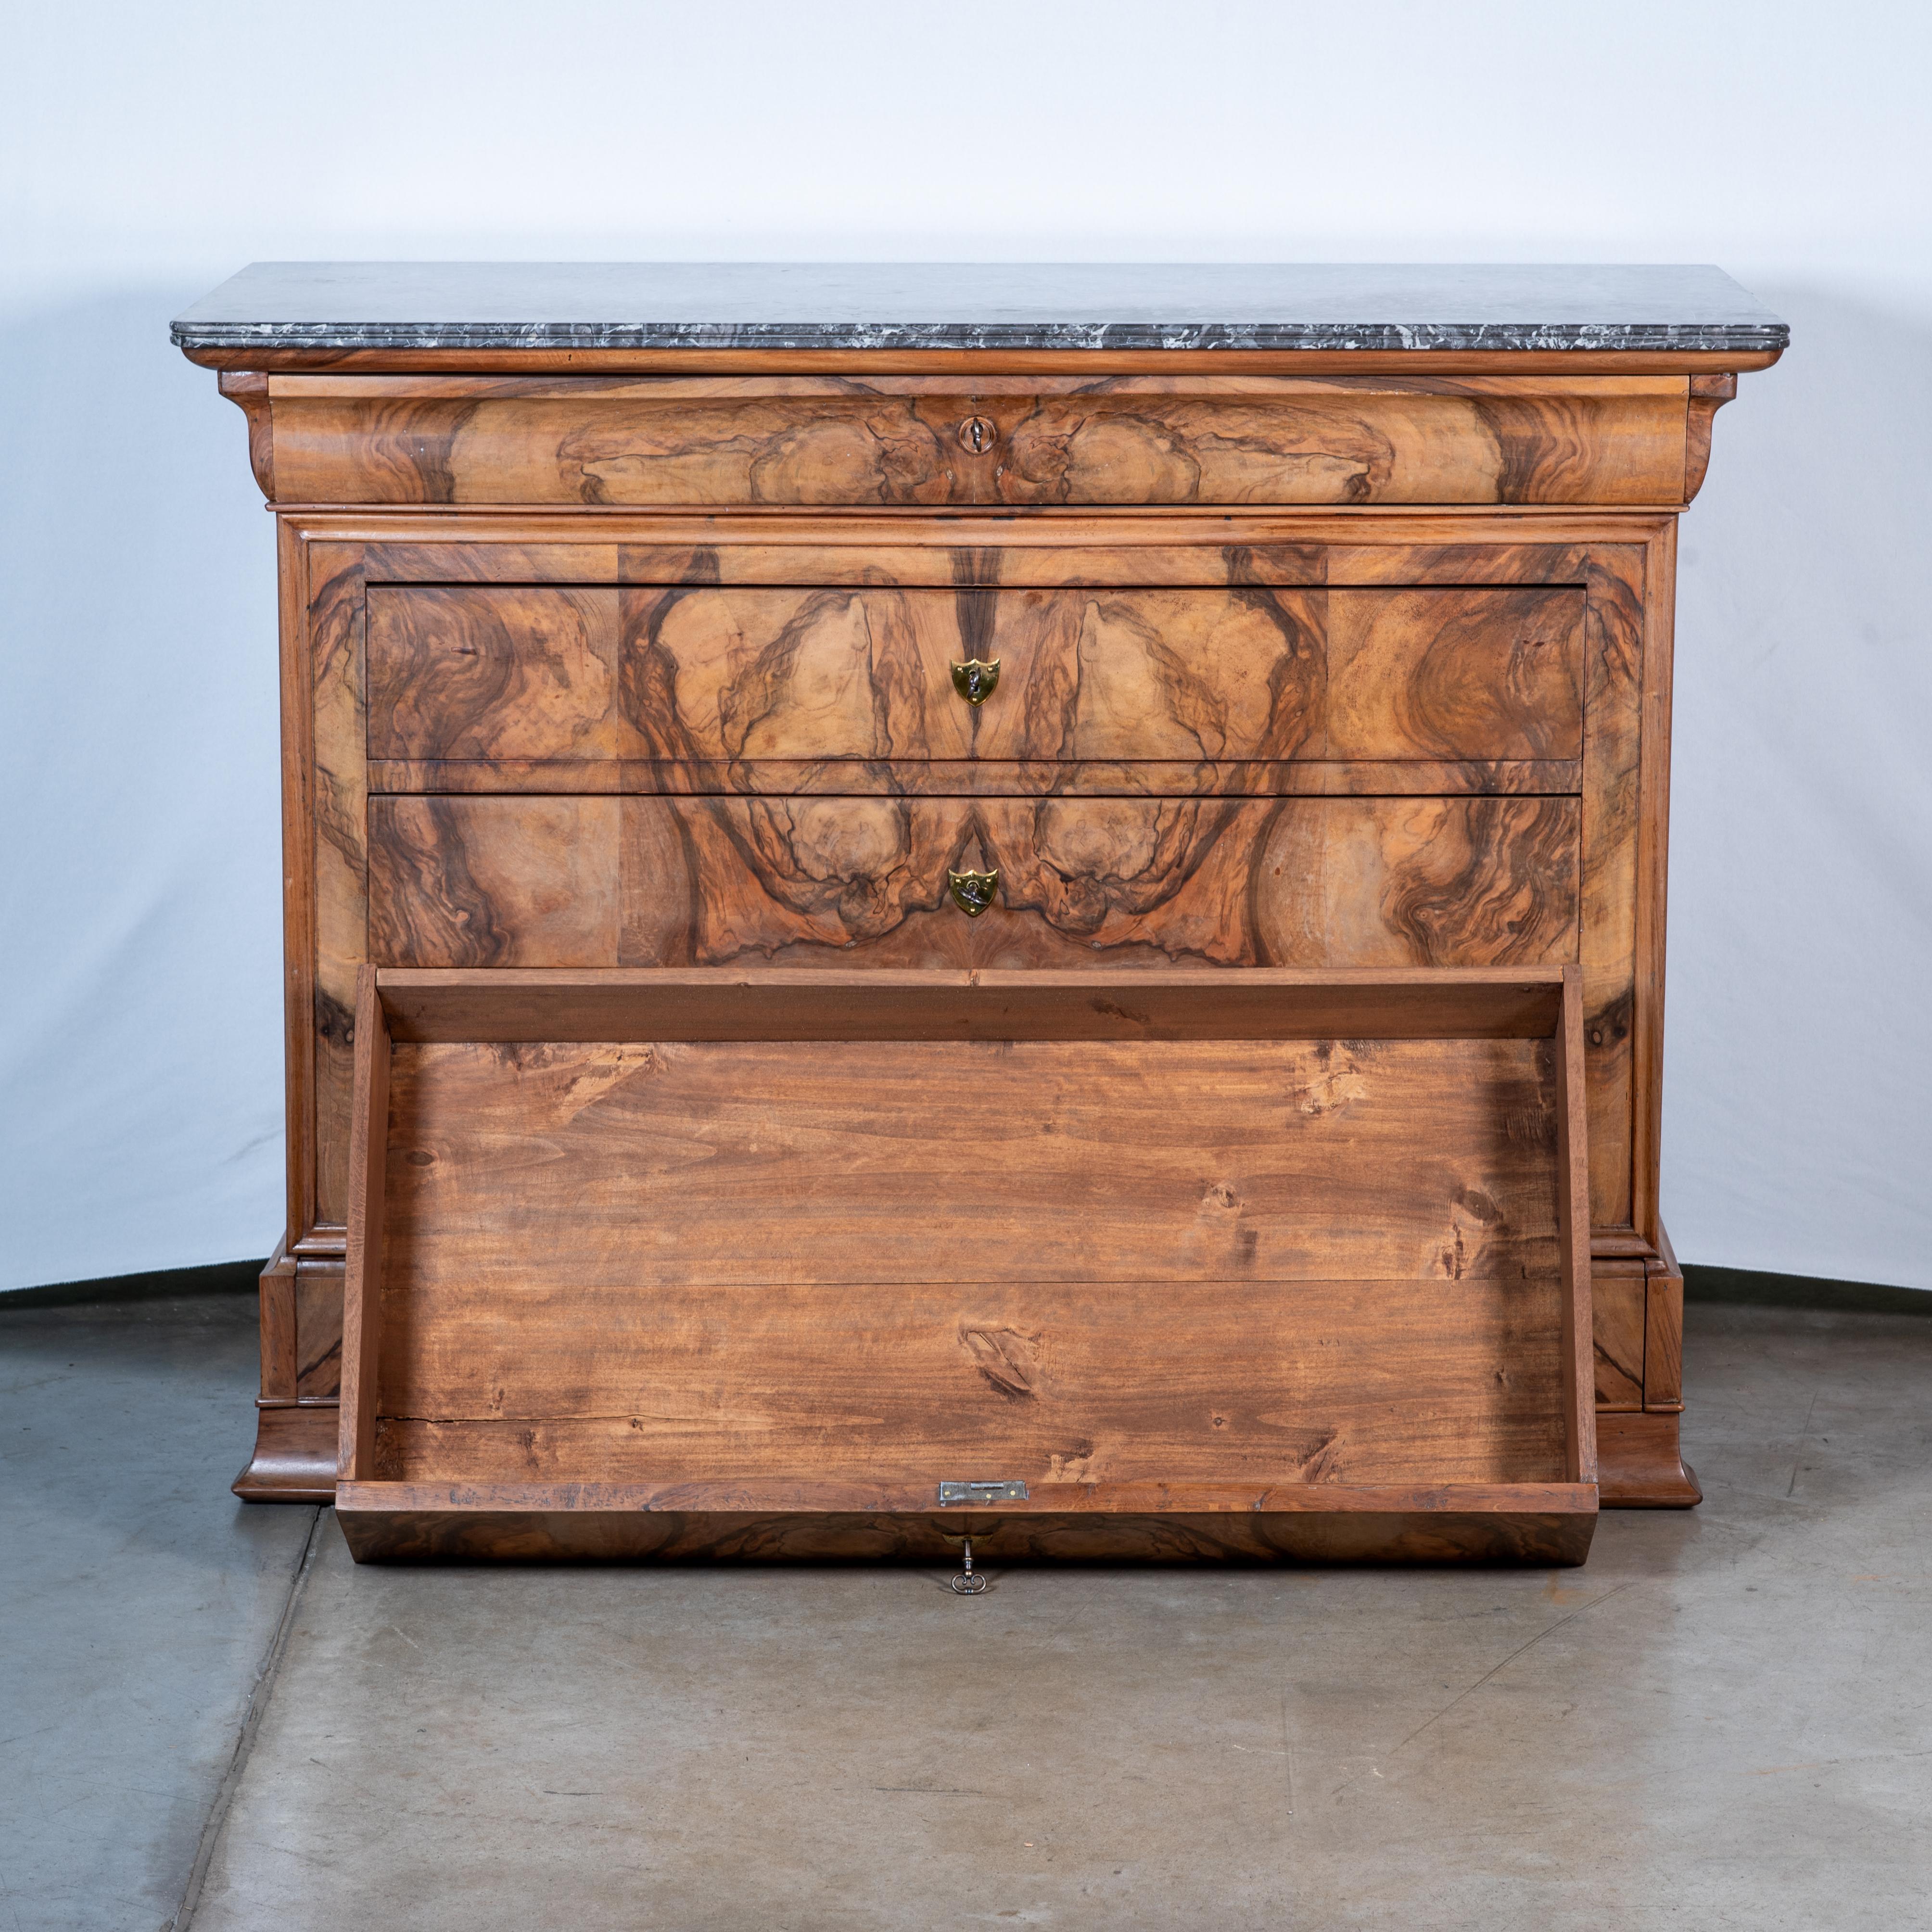 Indulge in the timeless elegance of 19th-century French design with our exquisite Louis Philippe Walnut Veneer Commode. Crafted during the illustrious Louis Philippe era, this magnificent piece exudes sophistication and refinement.

Featuring a rich